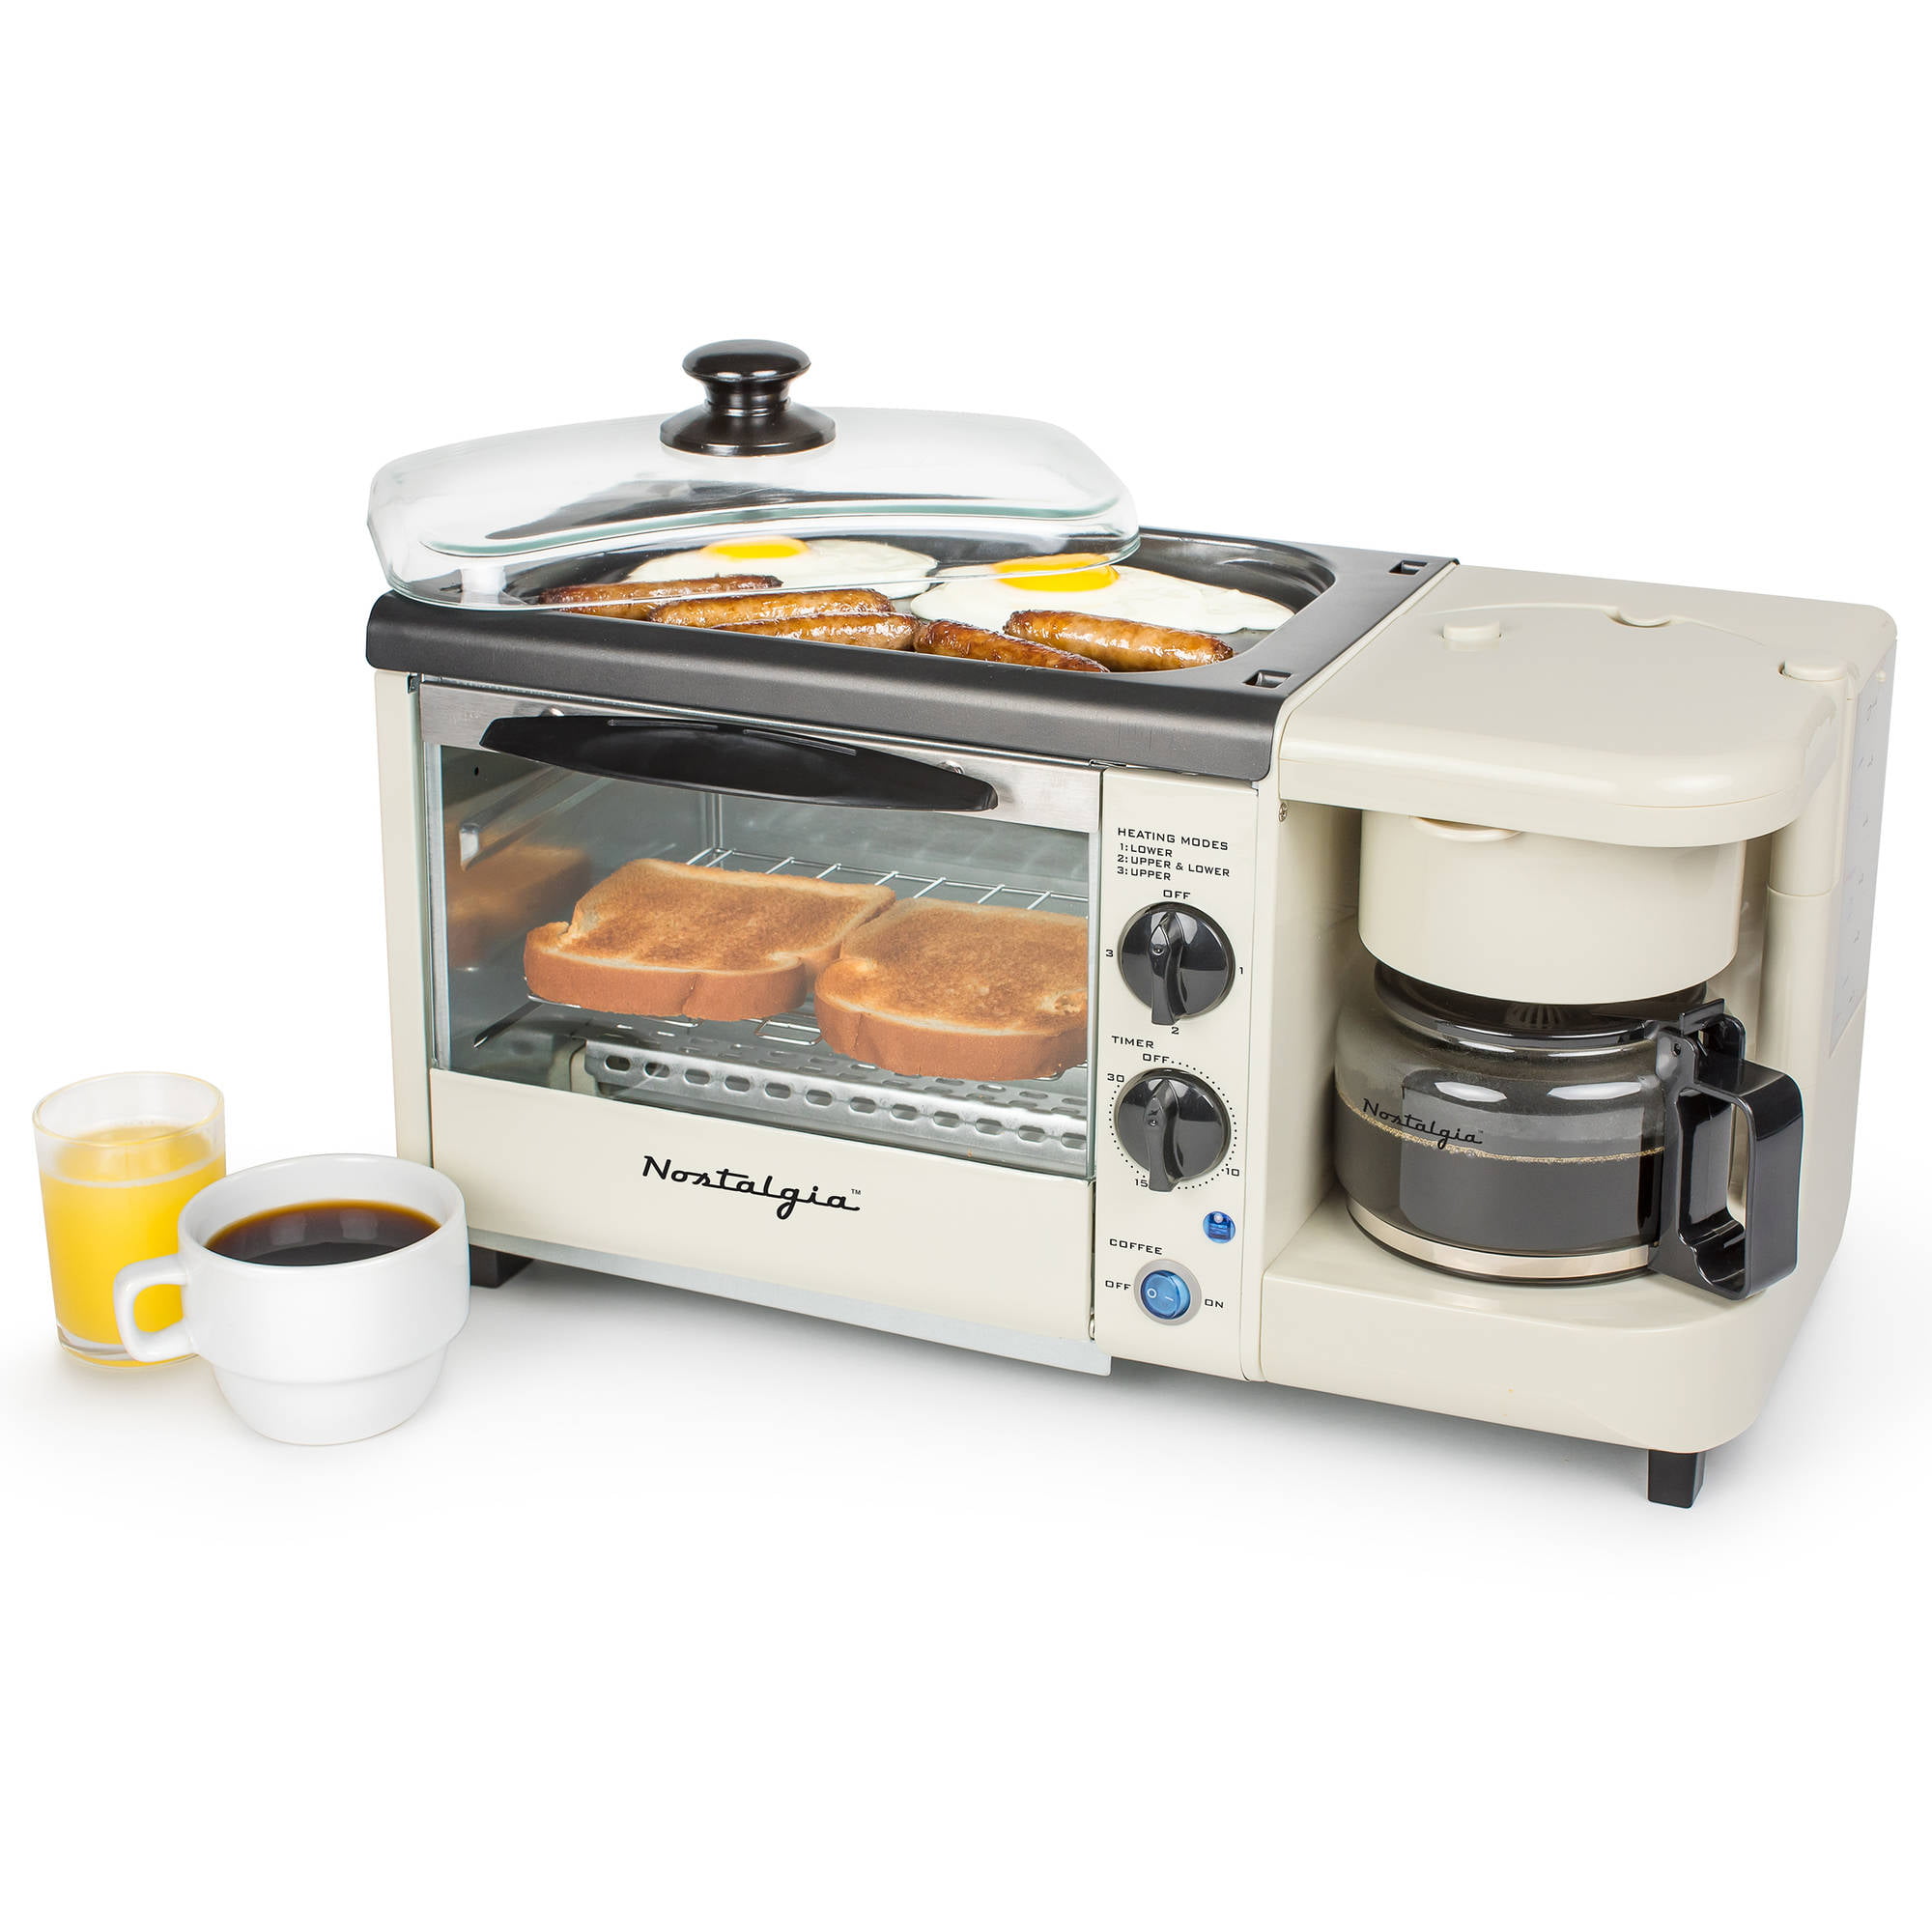 Combo Breakfast Cooker Appliance Retro Style Toaster Oven Coffee Maker Griddle